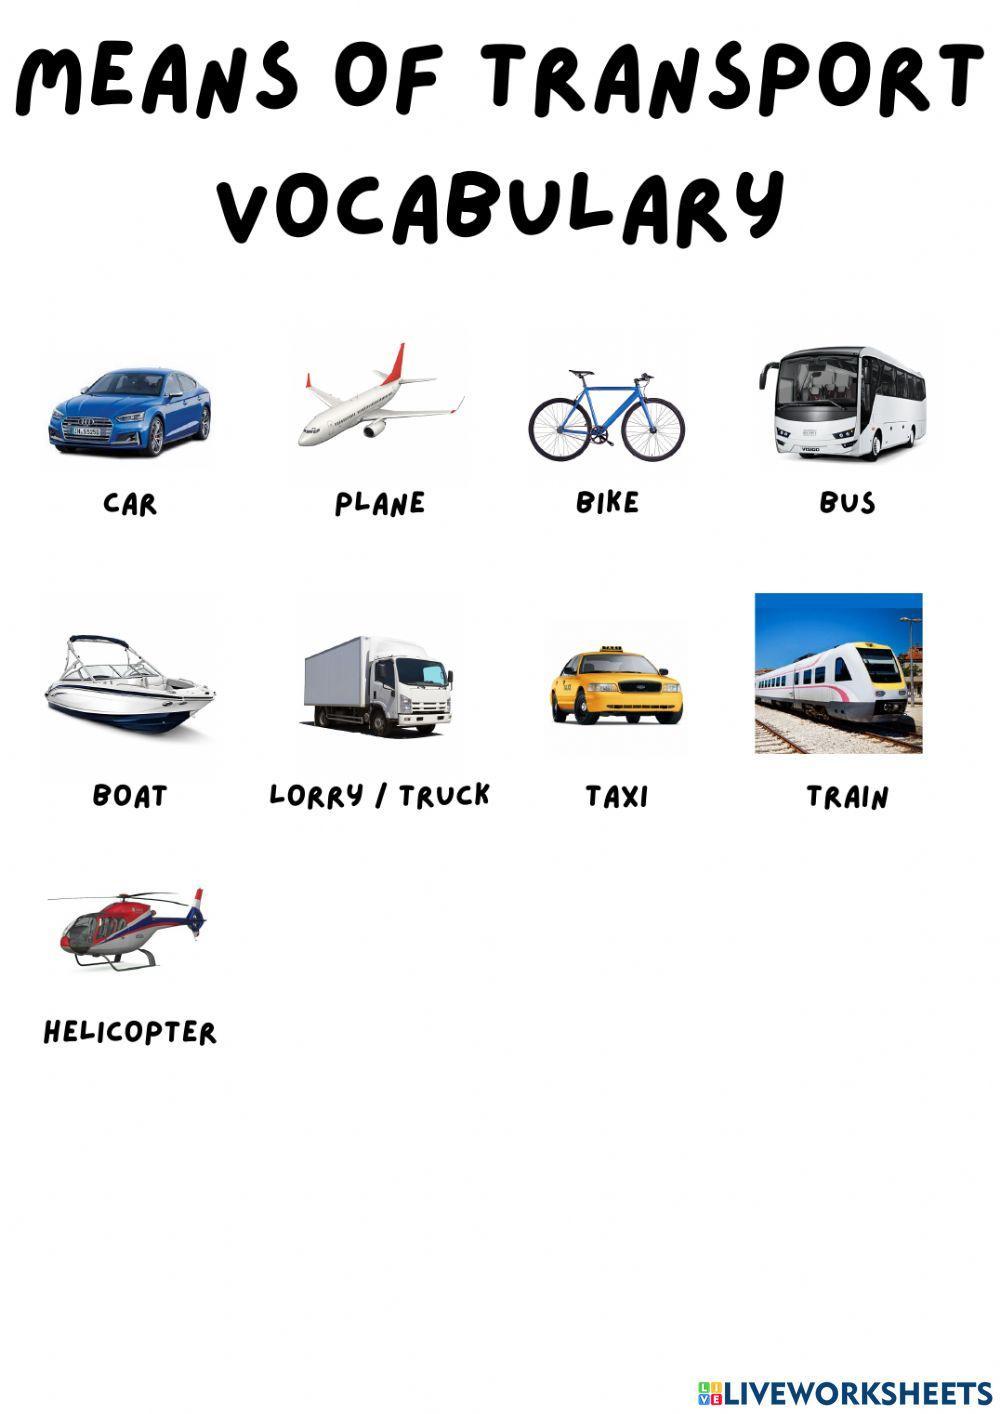 Means of transport vocabulary picture dictionary